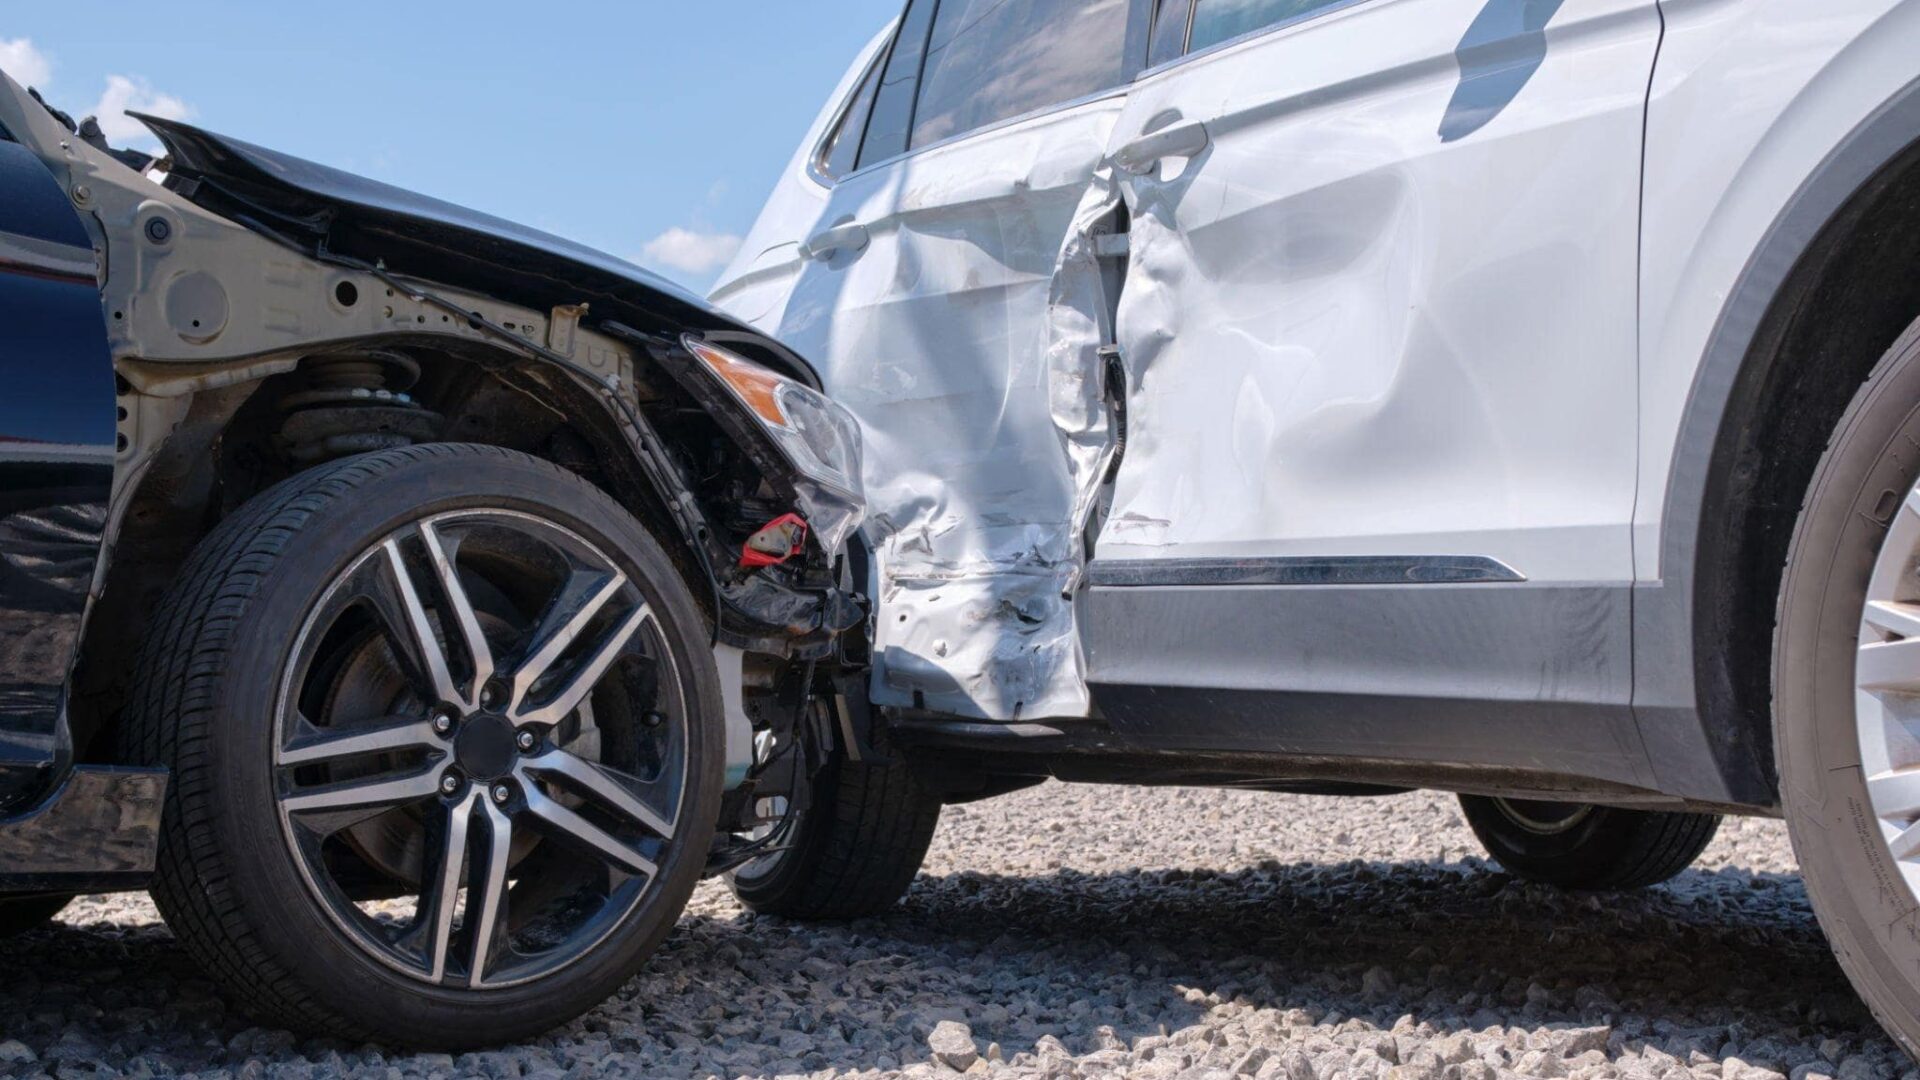 this accident between two cars is written in our auto accident article hub